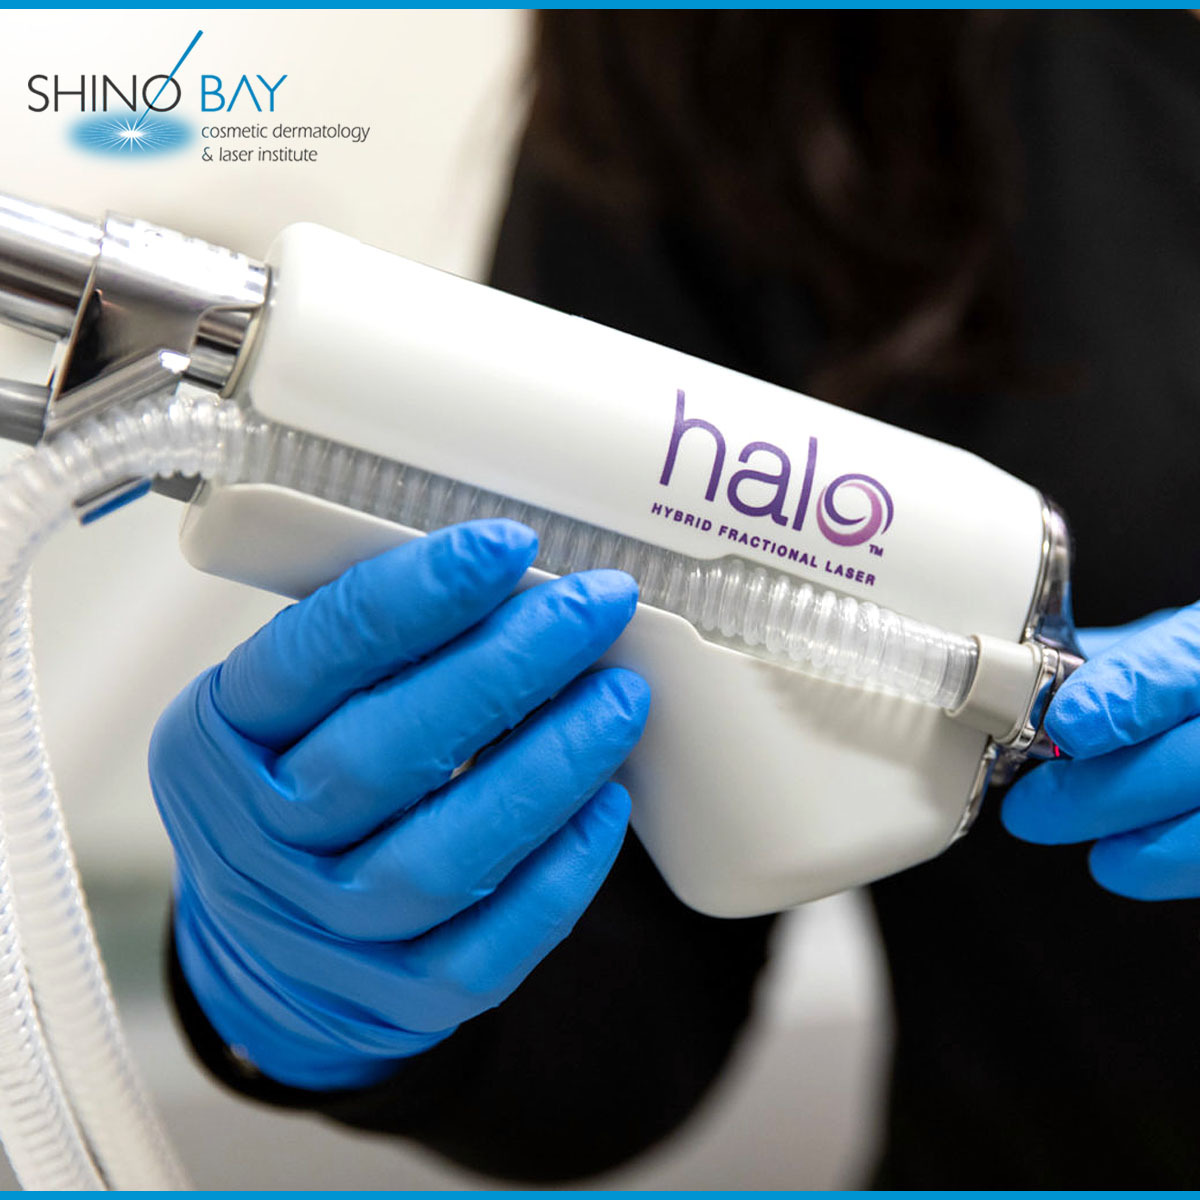 Say Hello to HALO® and Glowing Skin